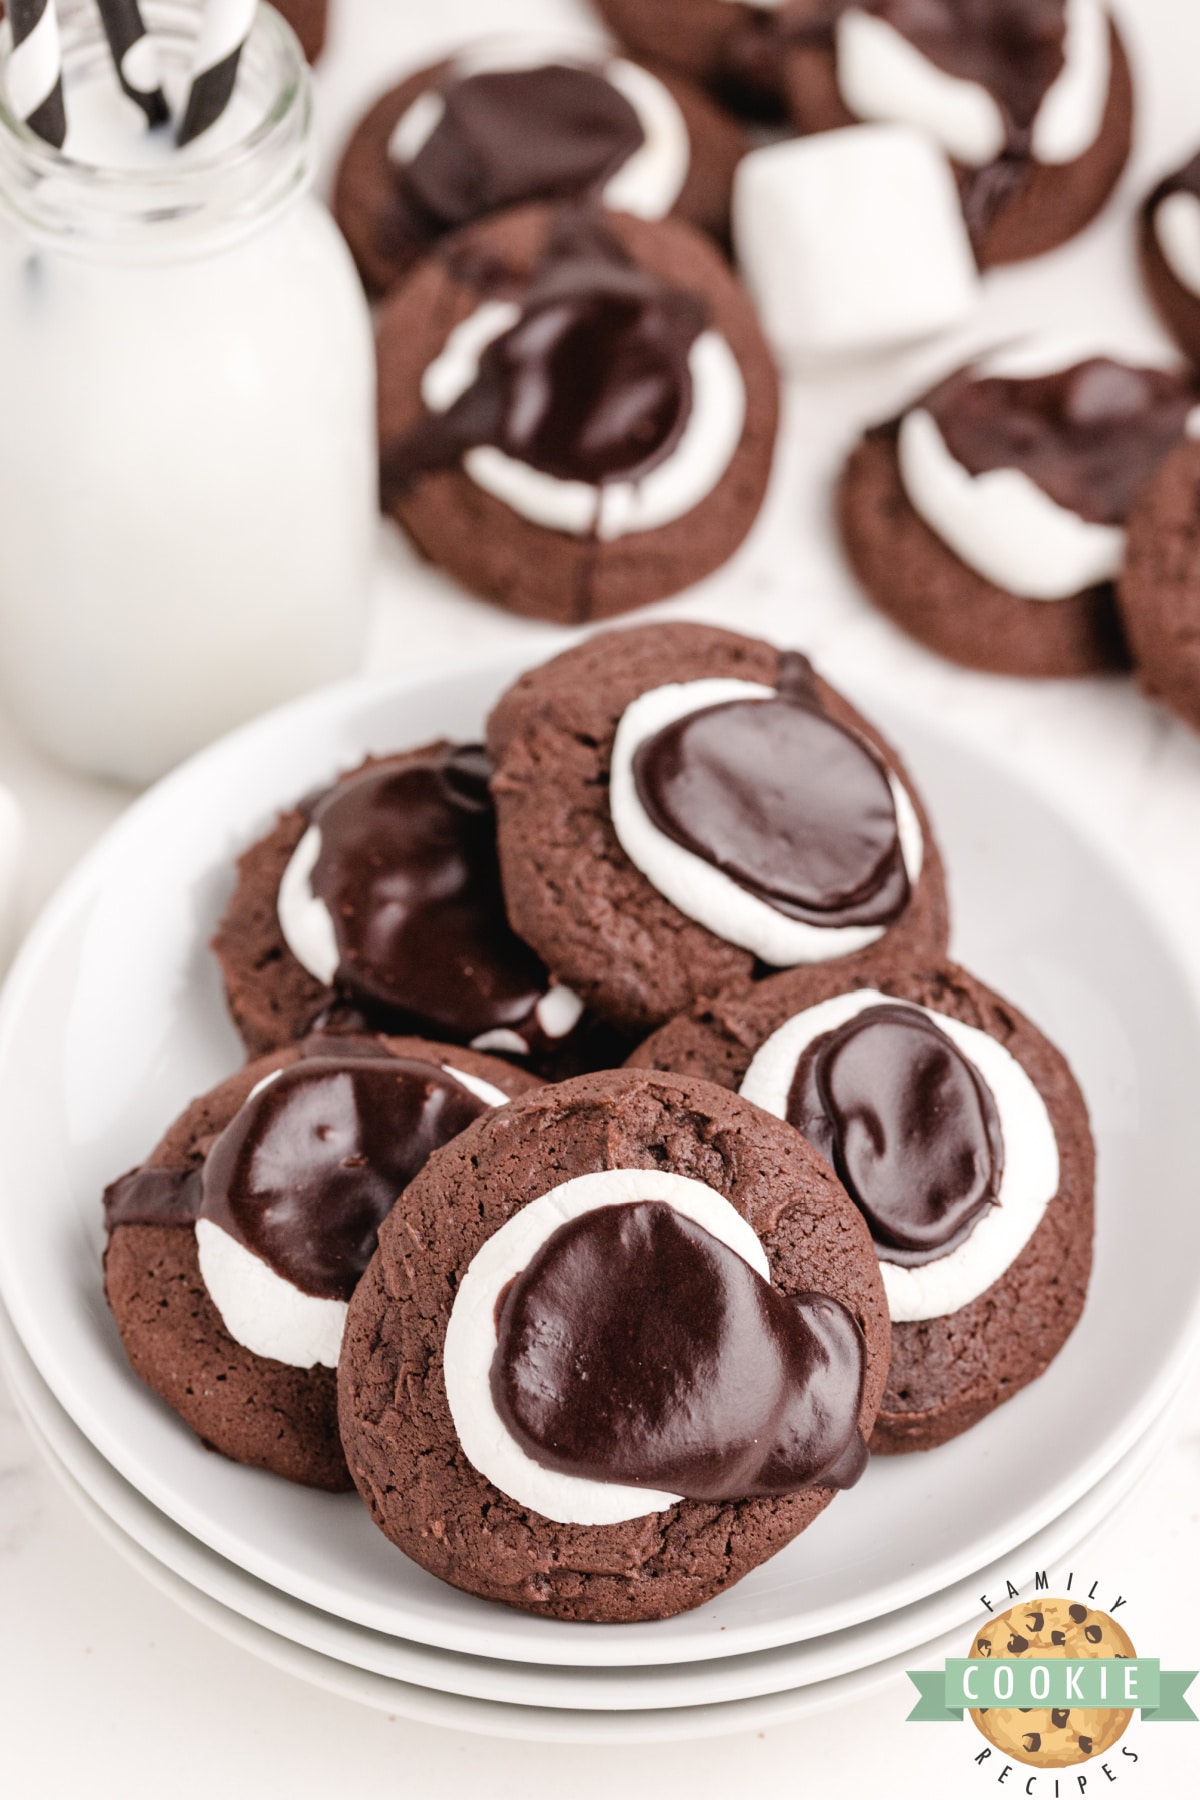 Chocolate Marshmallow Cookies are soft and thick chocolate cookies topped with a marshmallow and chocolate icing. Delicious chocolate cookie recipe with marshmallow.